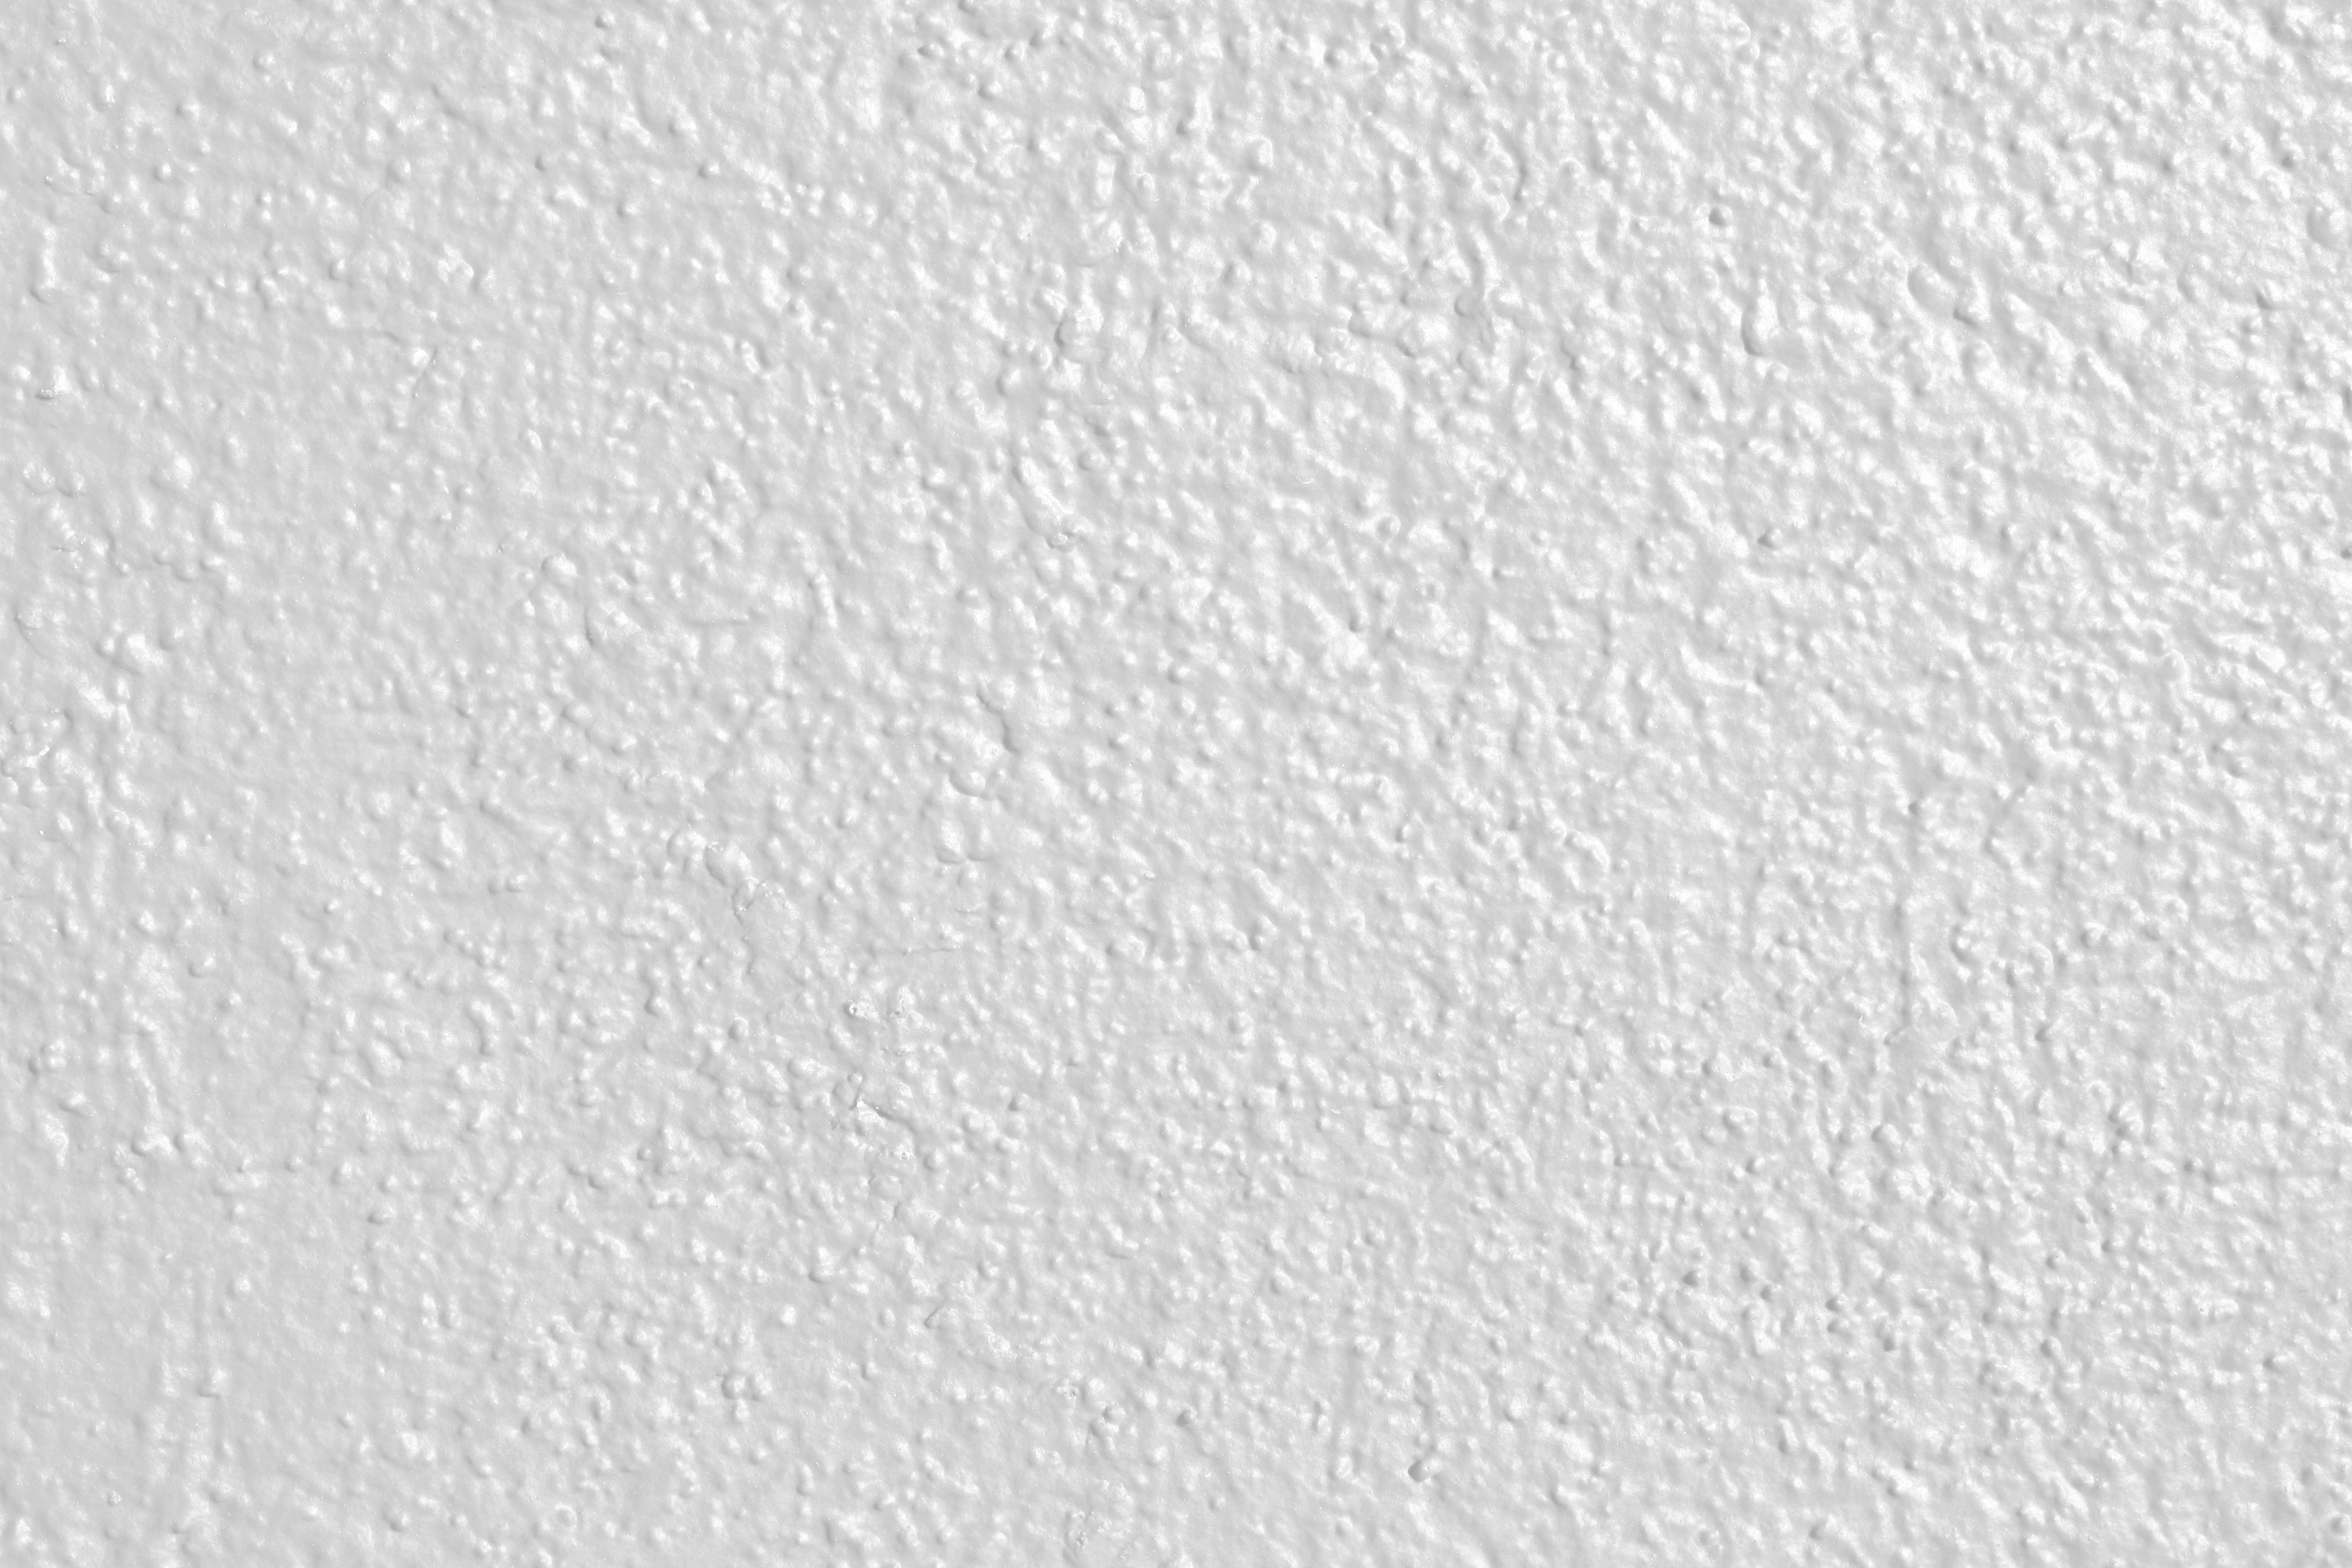 White Painted Wall Texture Picture Photograph Photos Public